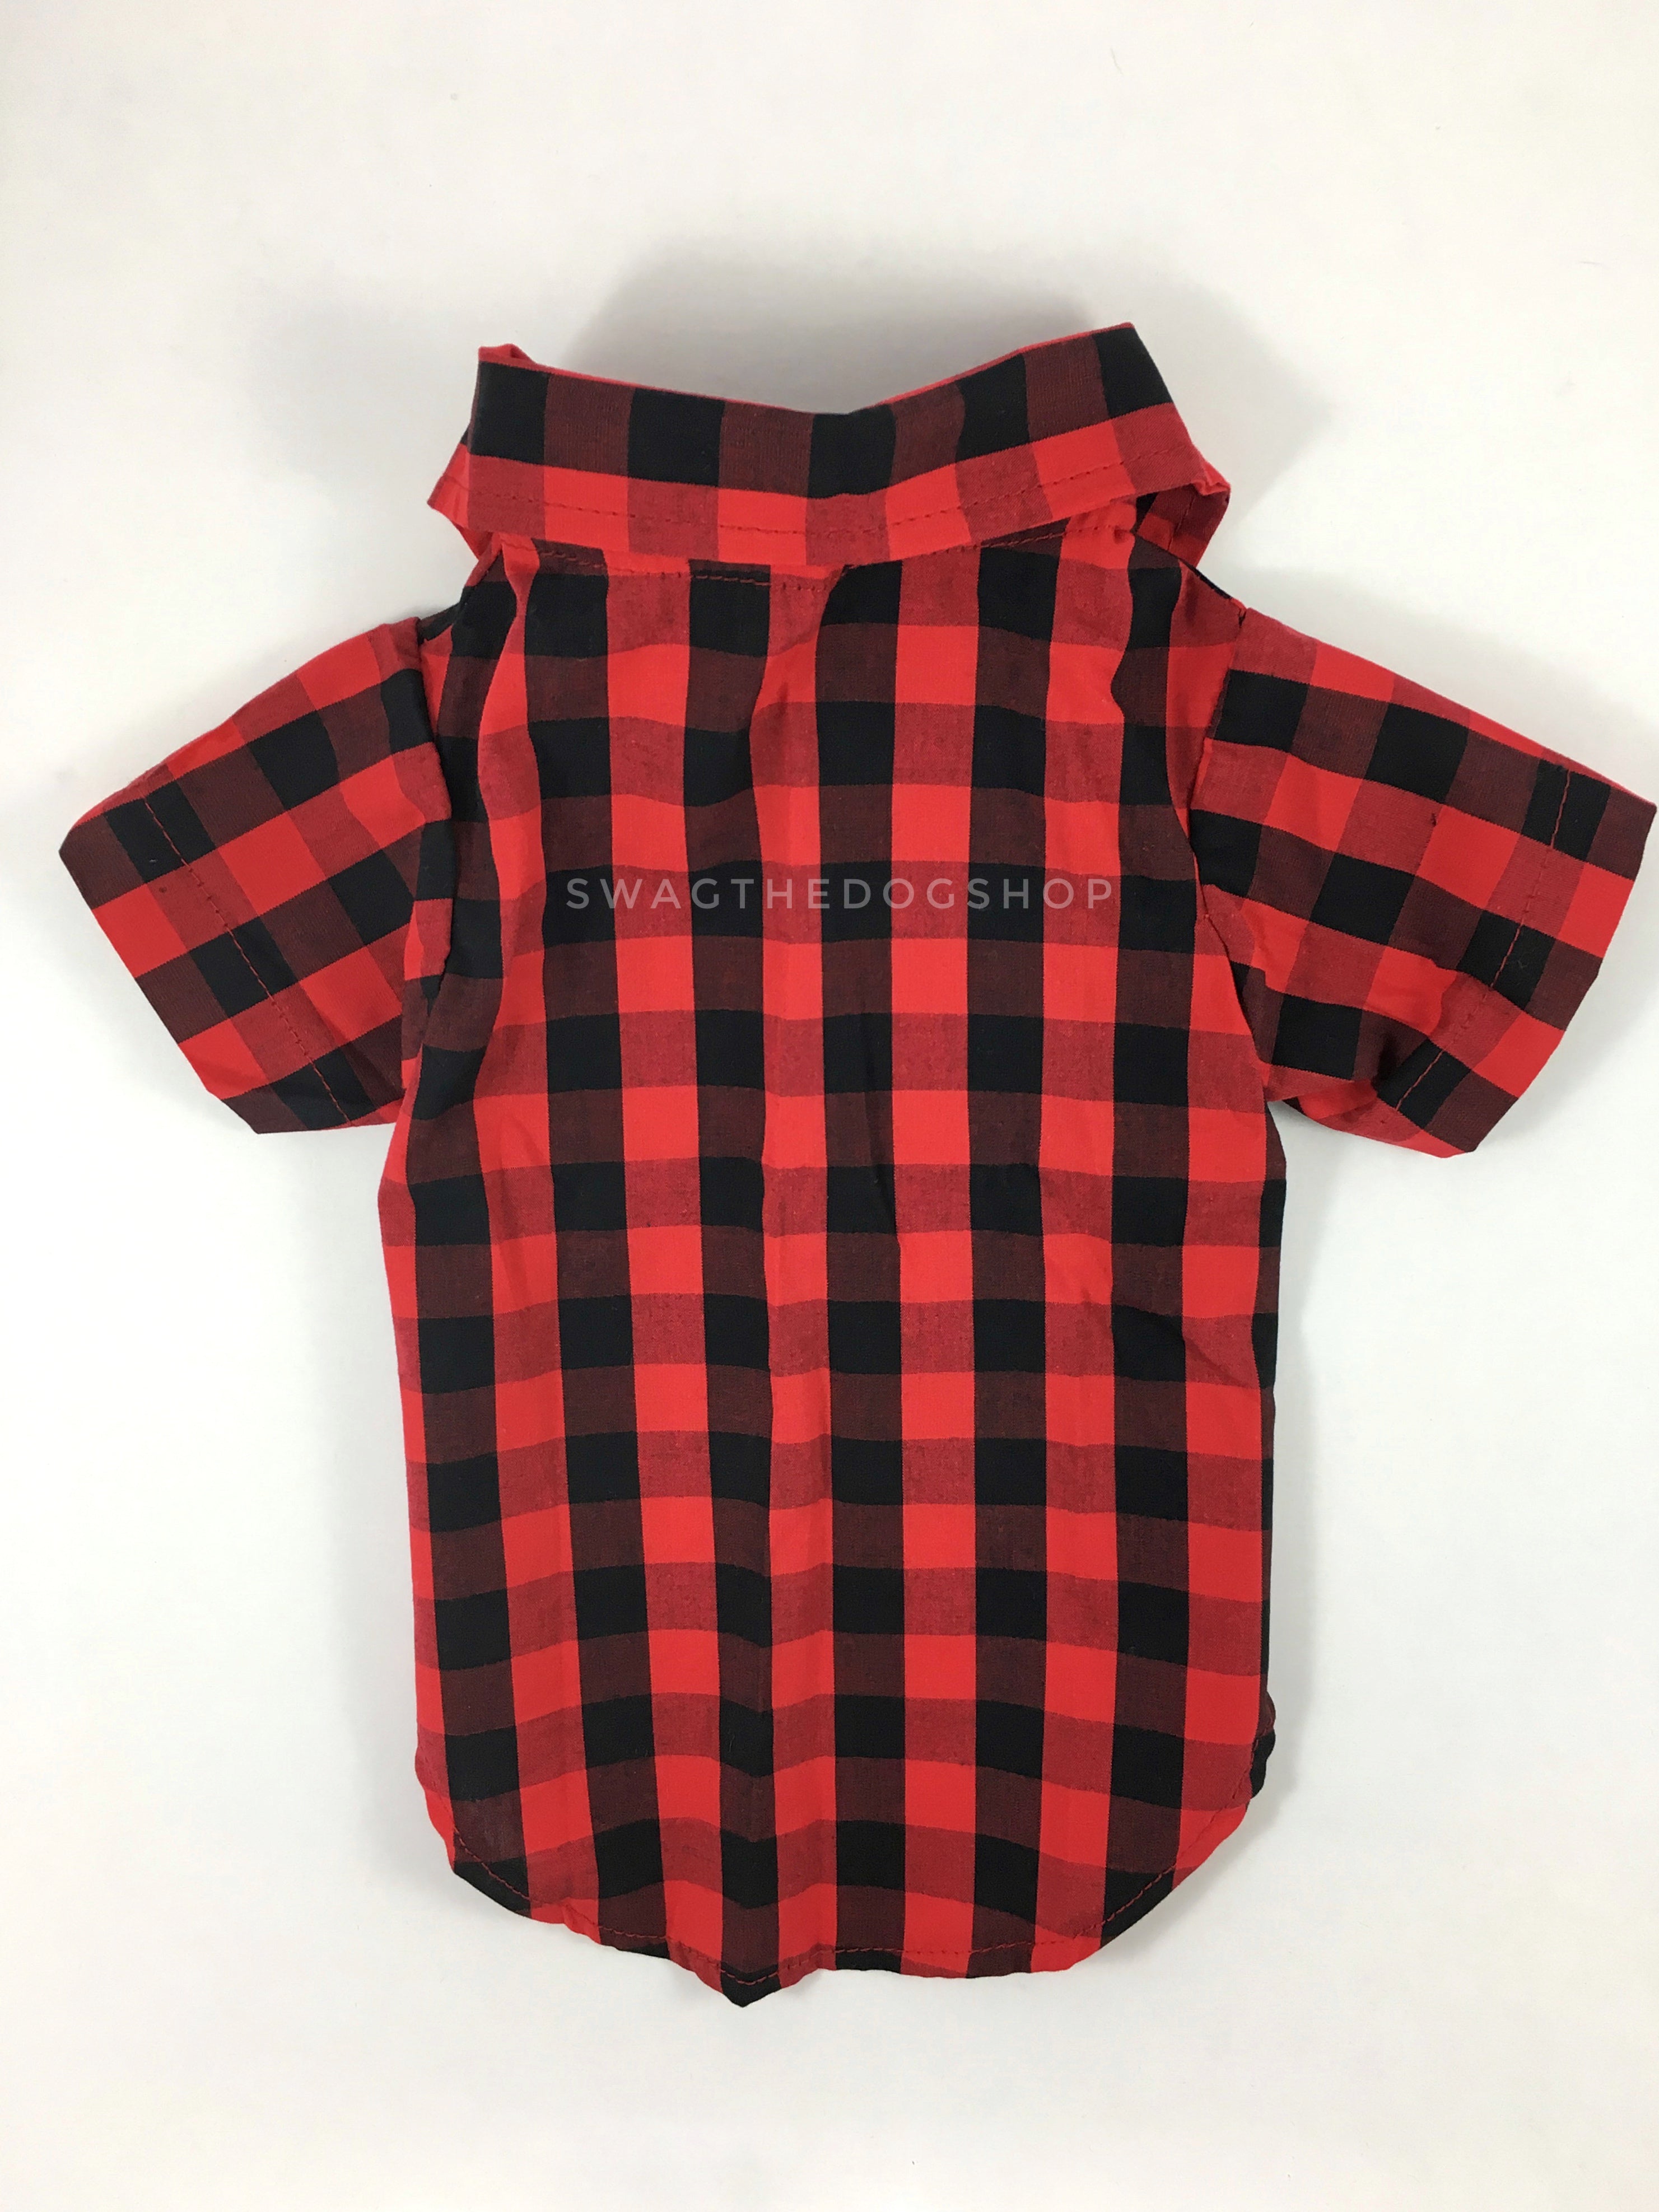 Kenora Summer Shirt - Product Back View. Black and Red Gingham Shirt